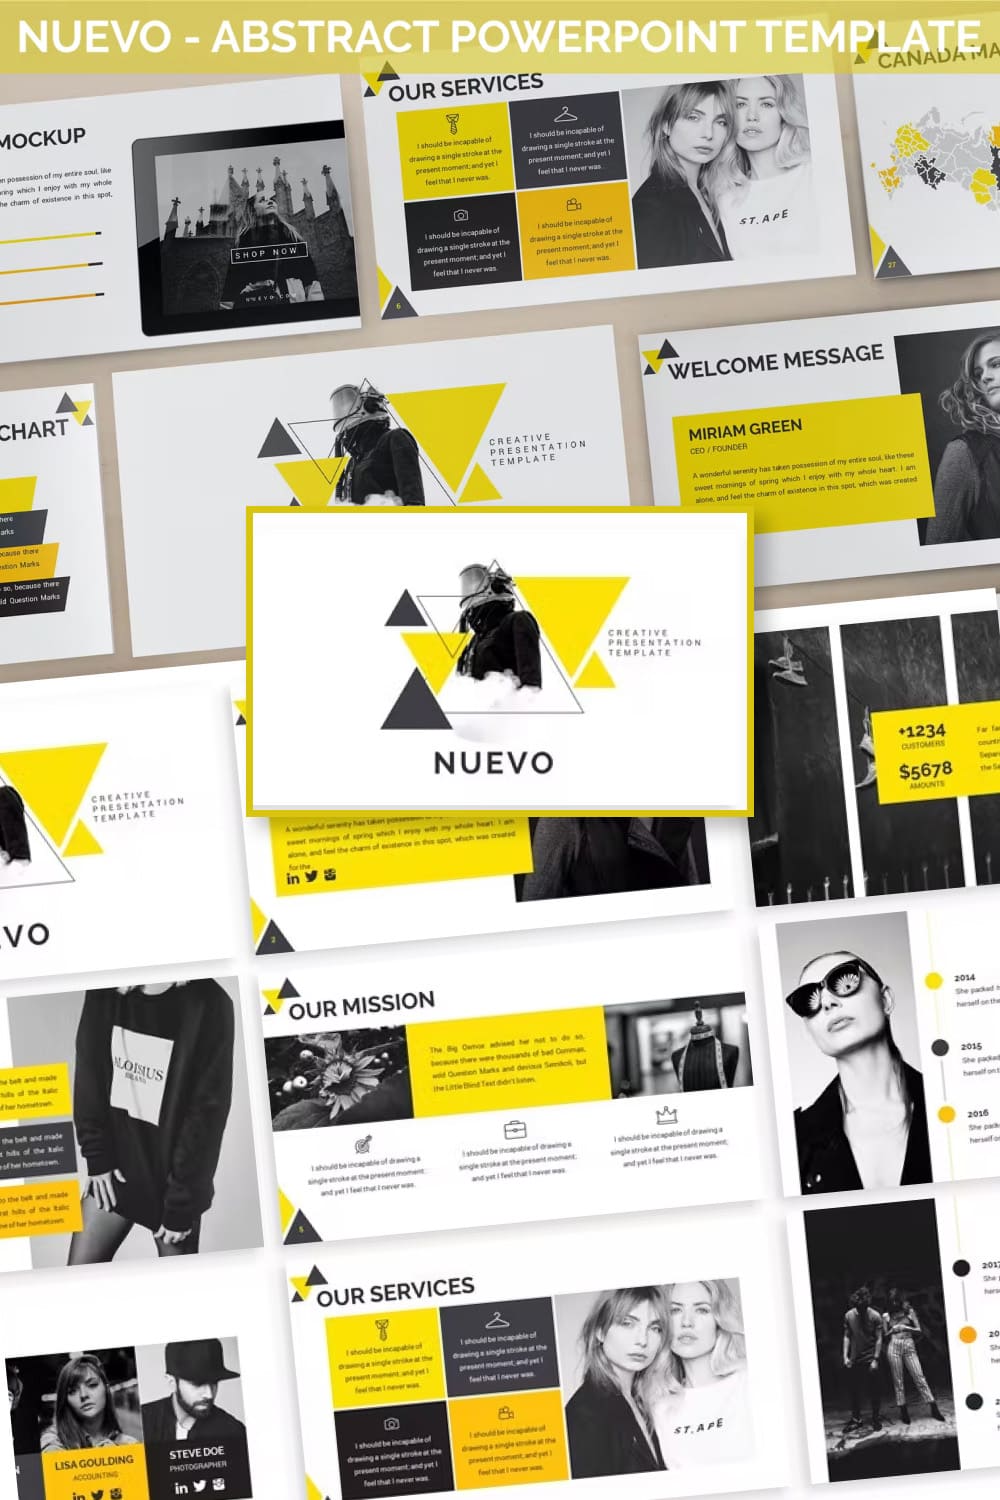 Nuevo abstract powerpoint template - Pinterest image preview.